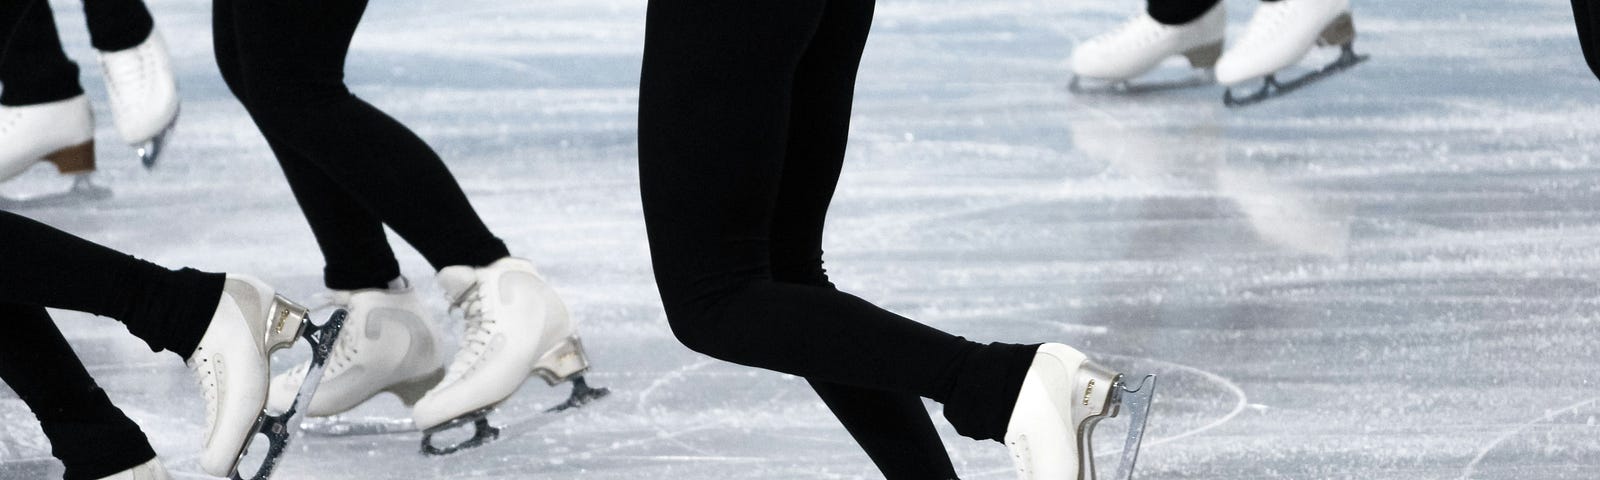 The legs and skates of a group of figure skaters wearing black leggings.